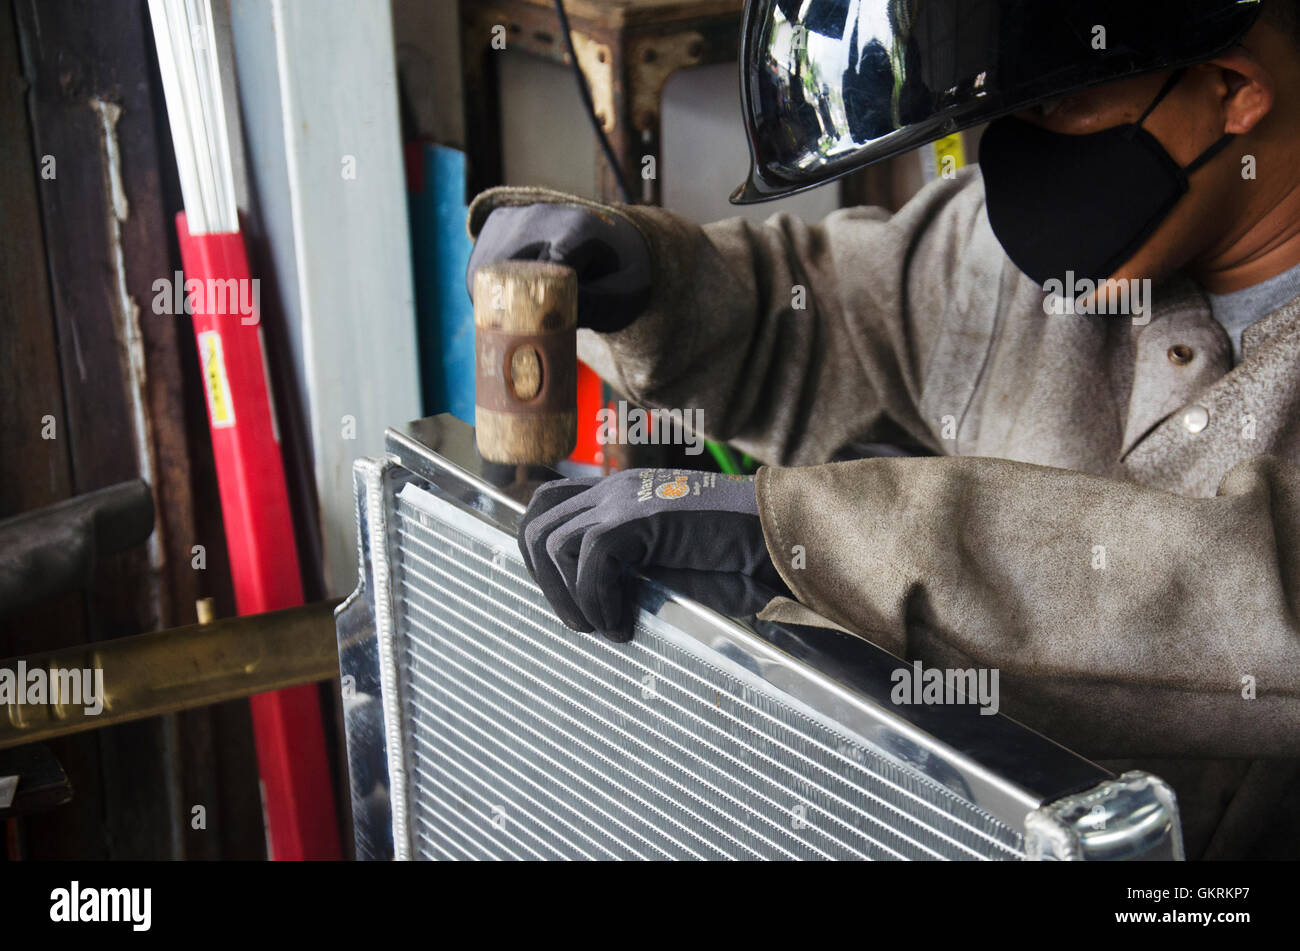 Thai people assembly radiator before use electricity welding for fix and solder radiator of car at local garage on July 7, 2016 Stock Photo